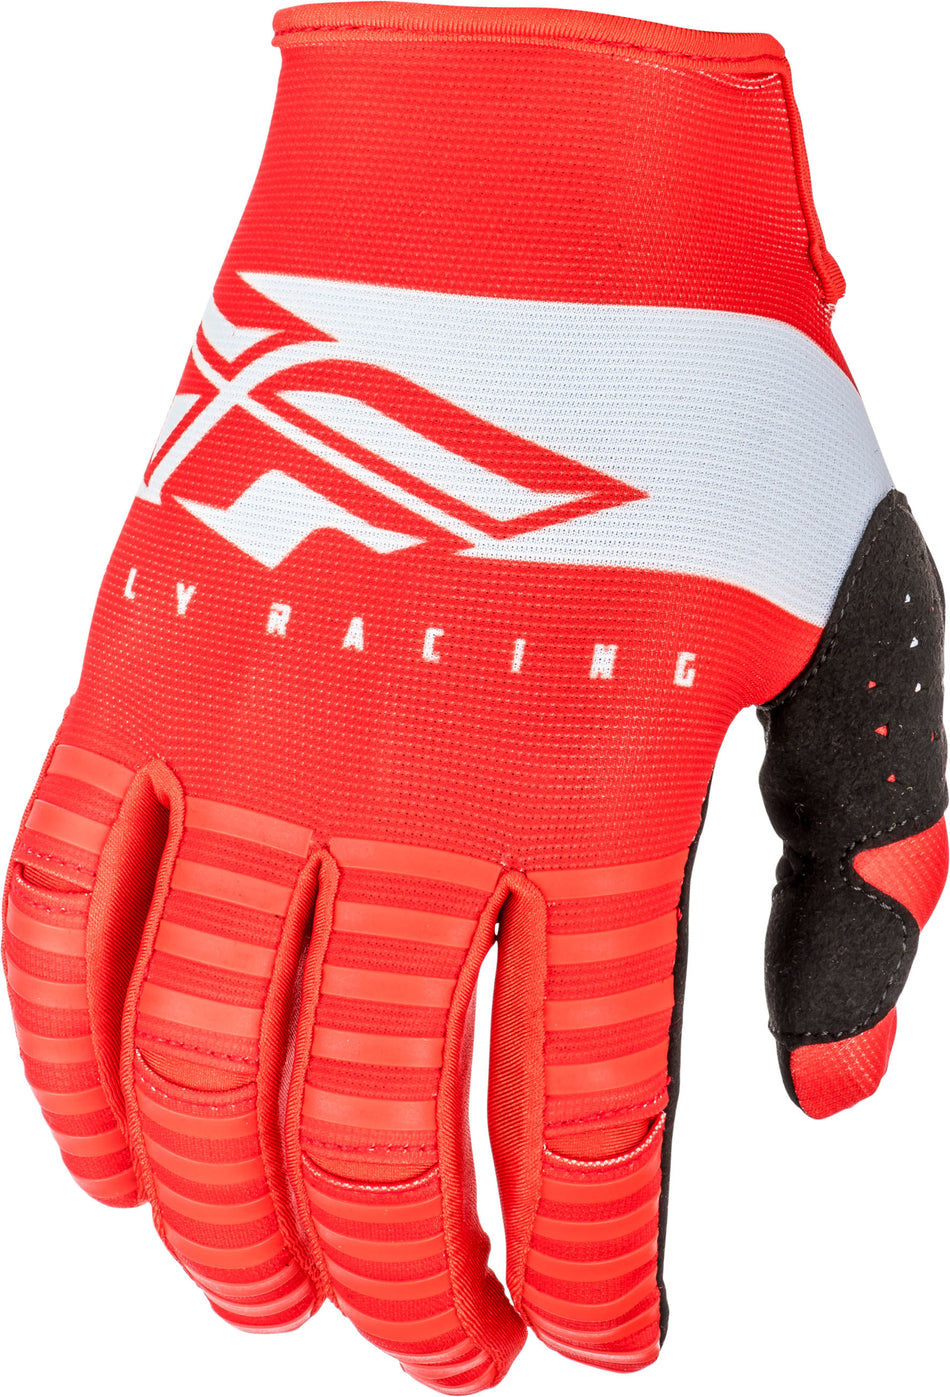 FLY RACING Kinetic Shield Gloves Red/White Sz 09 372-41209